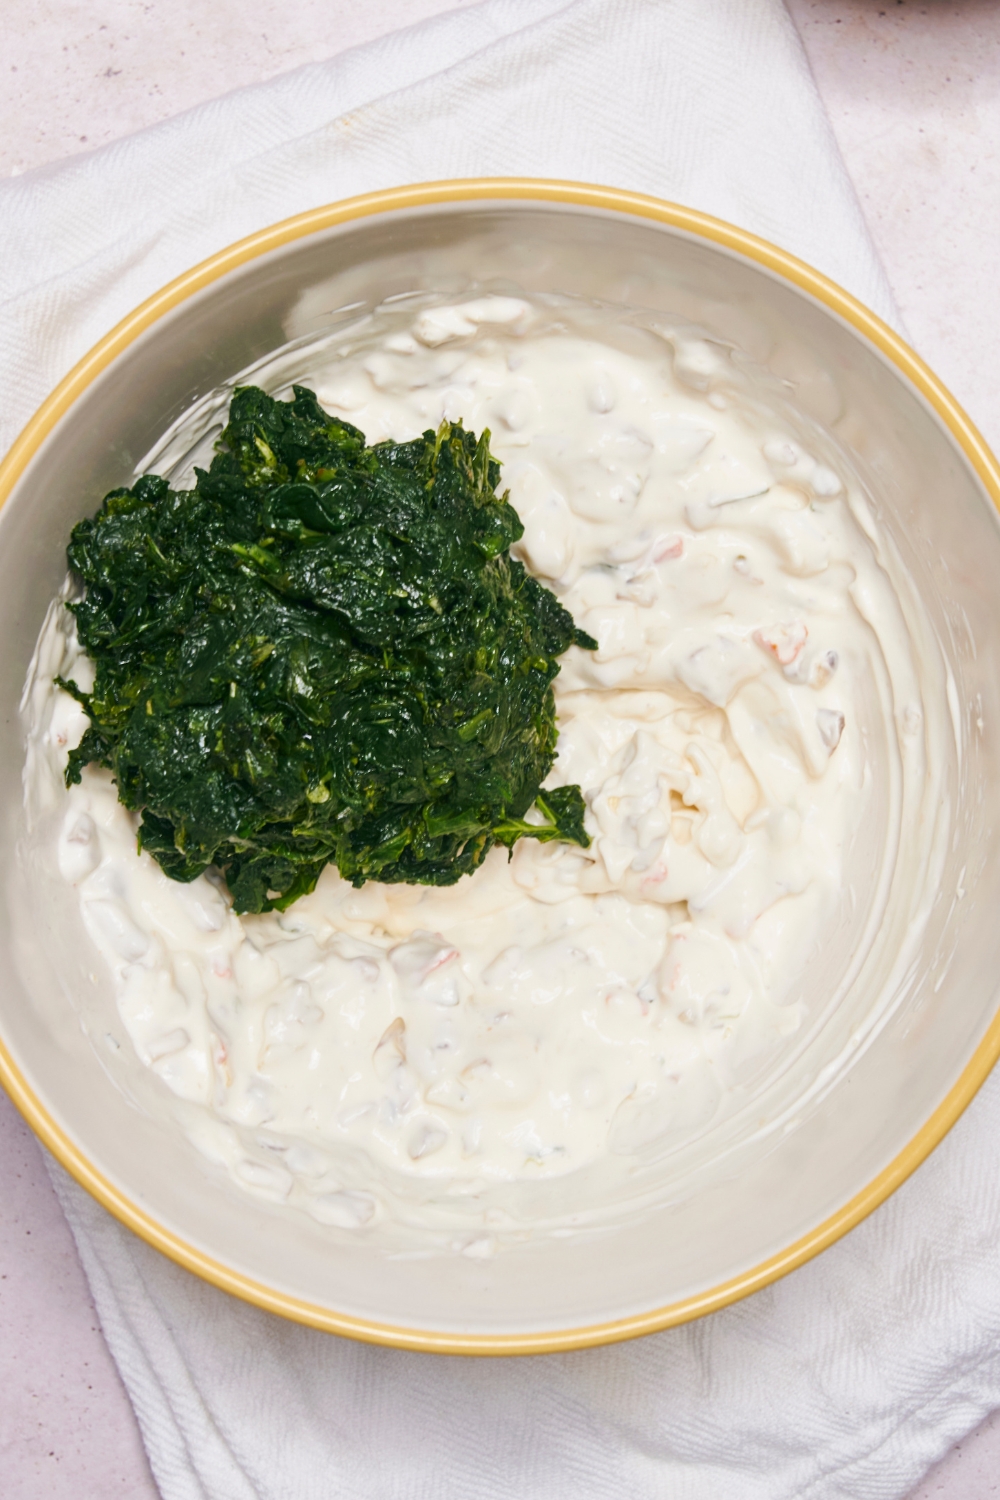 A bowl with the cream cheese, sour cream, knorr vegetable dip seasonings, and chopped water chestnuts mixed. Spinach has just been added to the bowl.